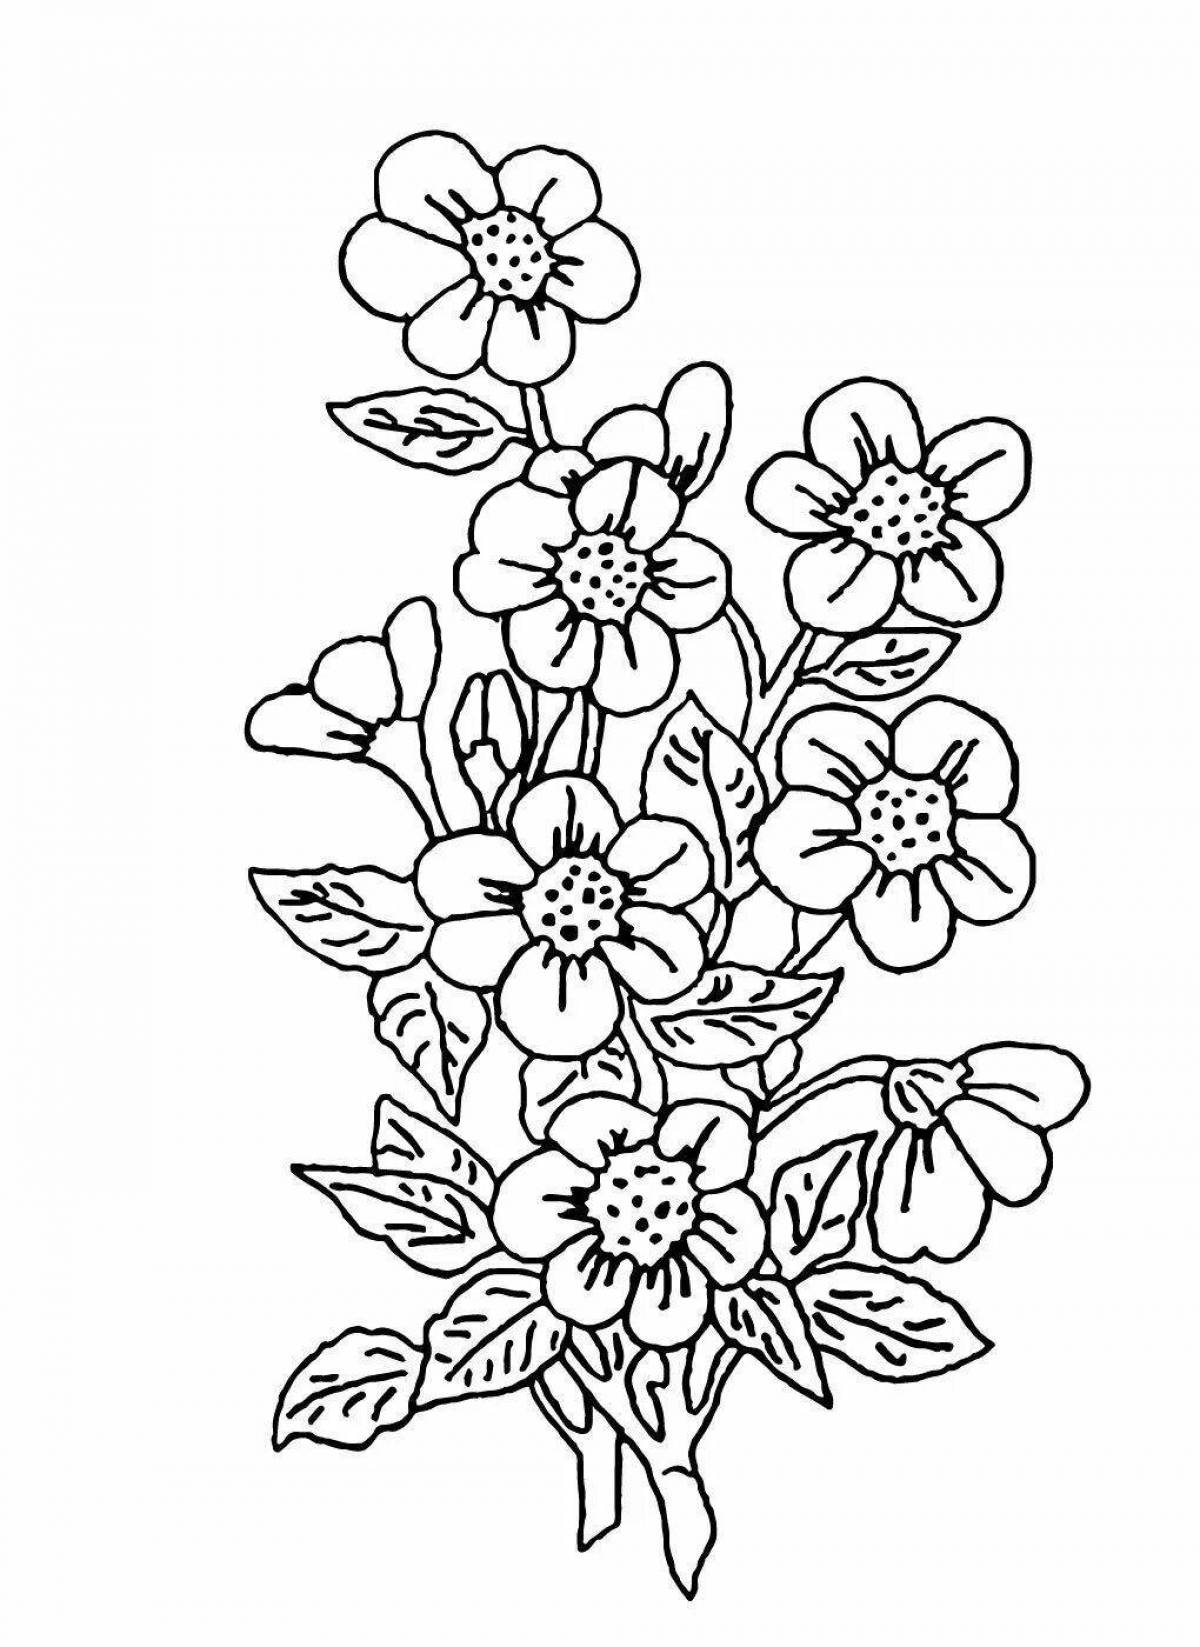 Coloring book shining embroidery